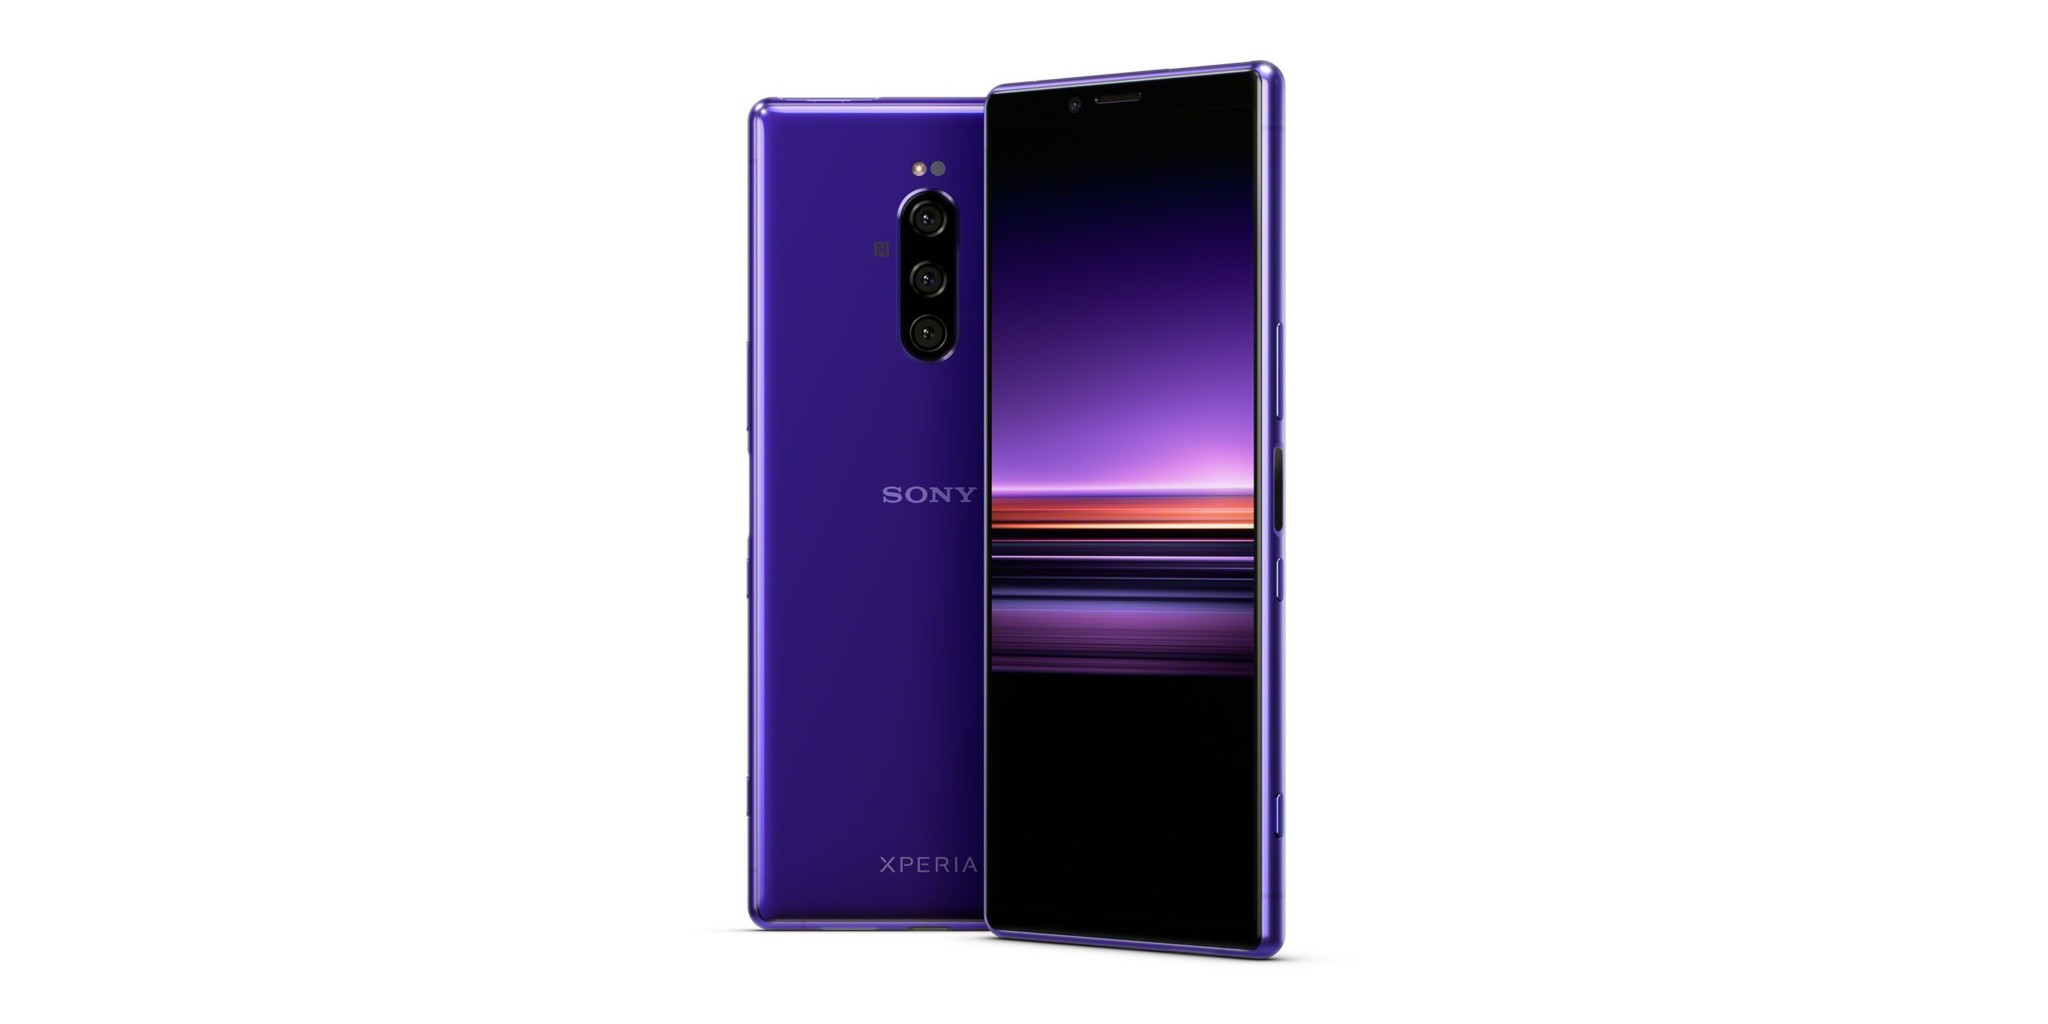 Sony Starts New With Its Xperia 1 Flagship With 21:9 Cinematic 4k Oled Screen & Triple Cameras